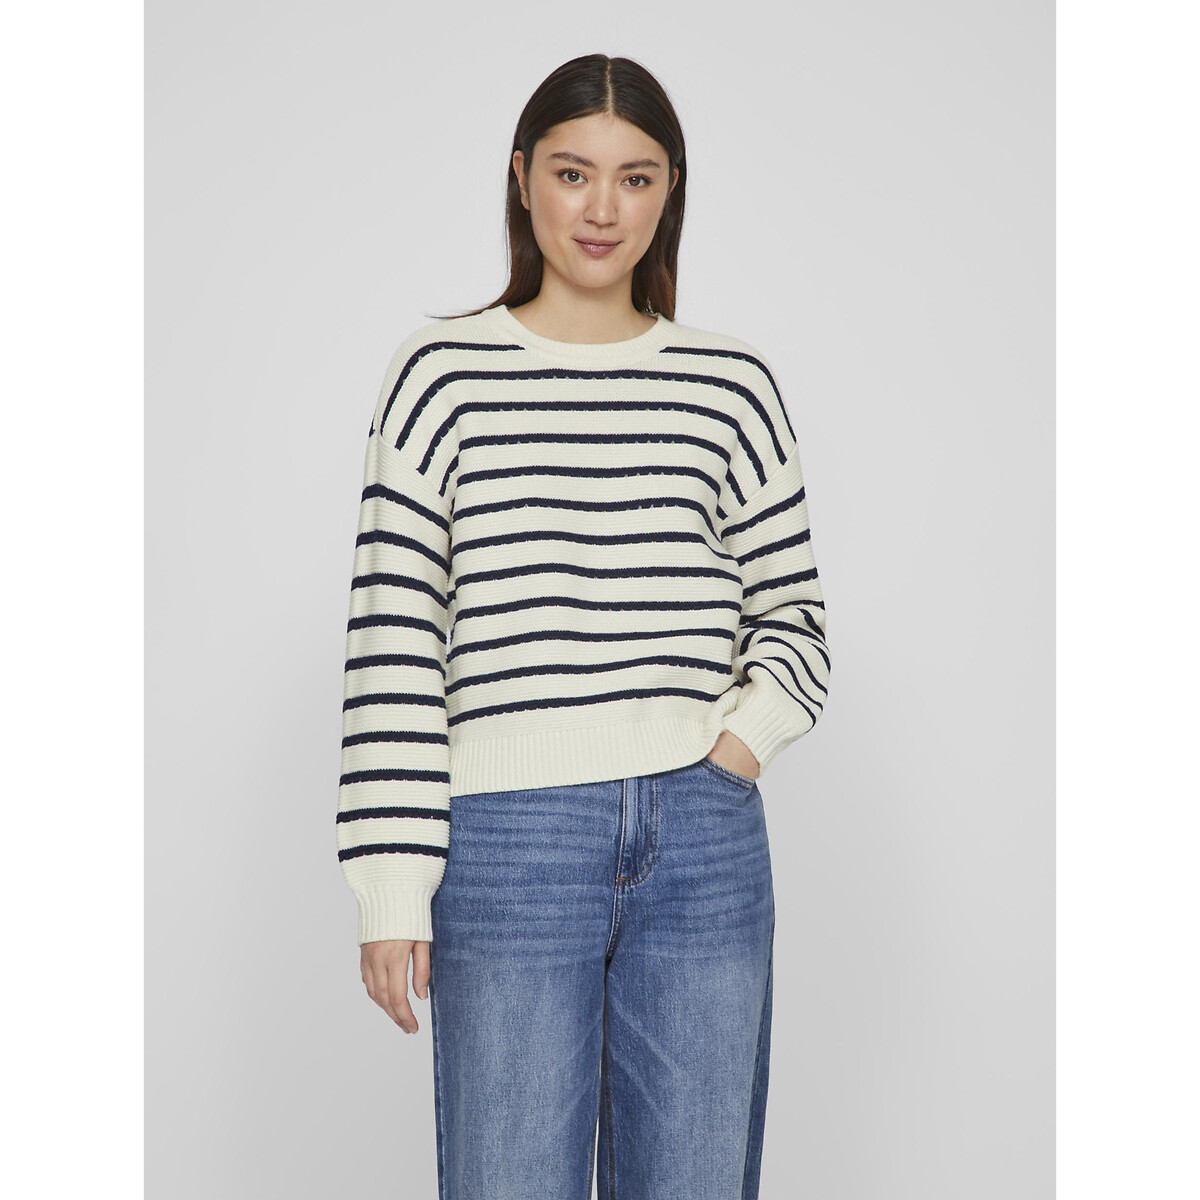 Striped Cotton Mix Jumper in Openwork Knit with Balloon Sleeves